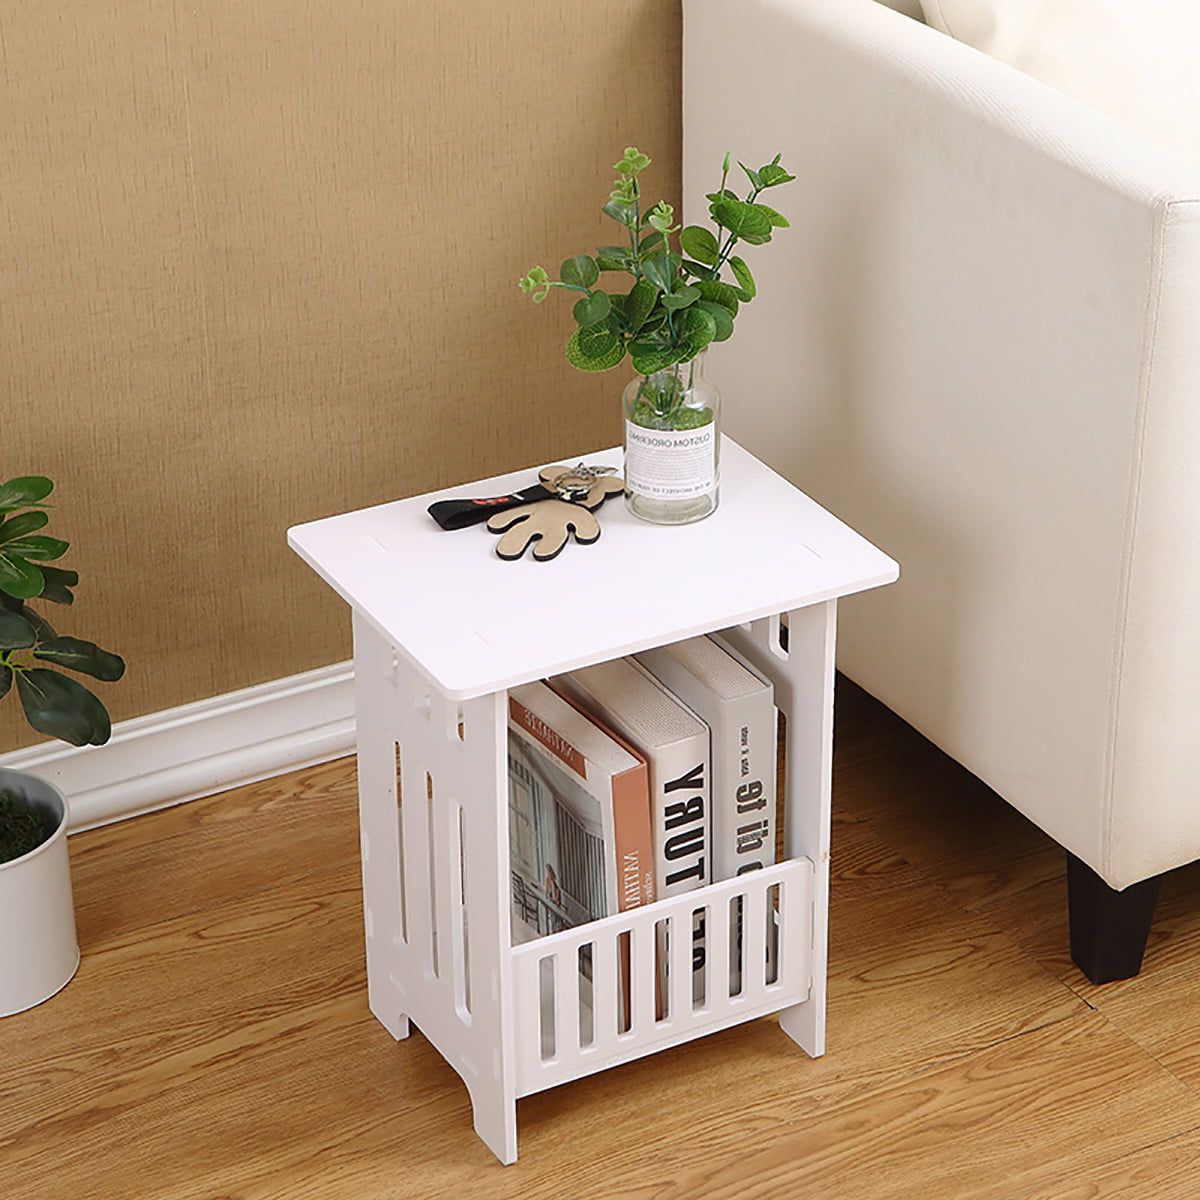 Plant Stands With Side Table Inside Favorite White Modern Bedside Table Bedroom Nightstand End Table Plant Stand Holder  Storage Rack Organizer – Walmart (View 9 of 15)